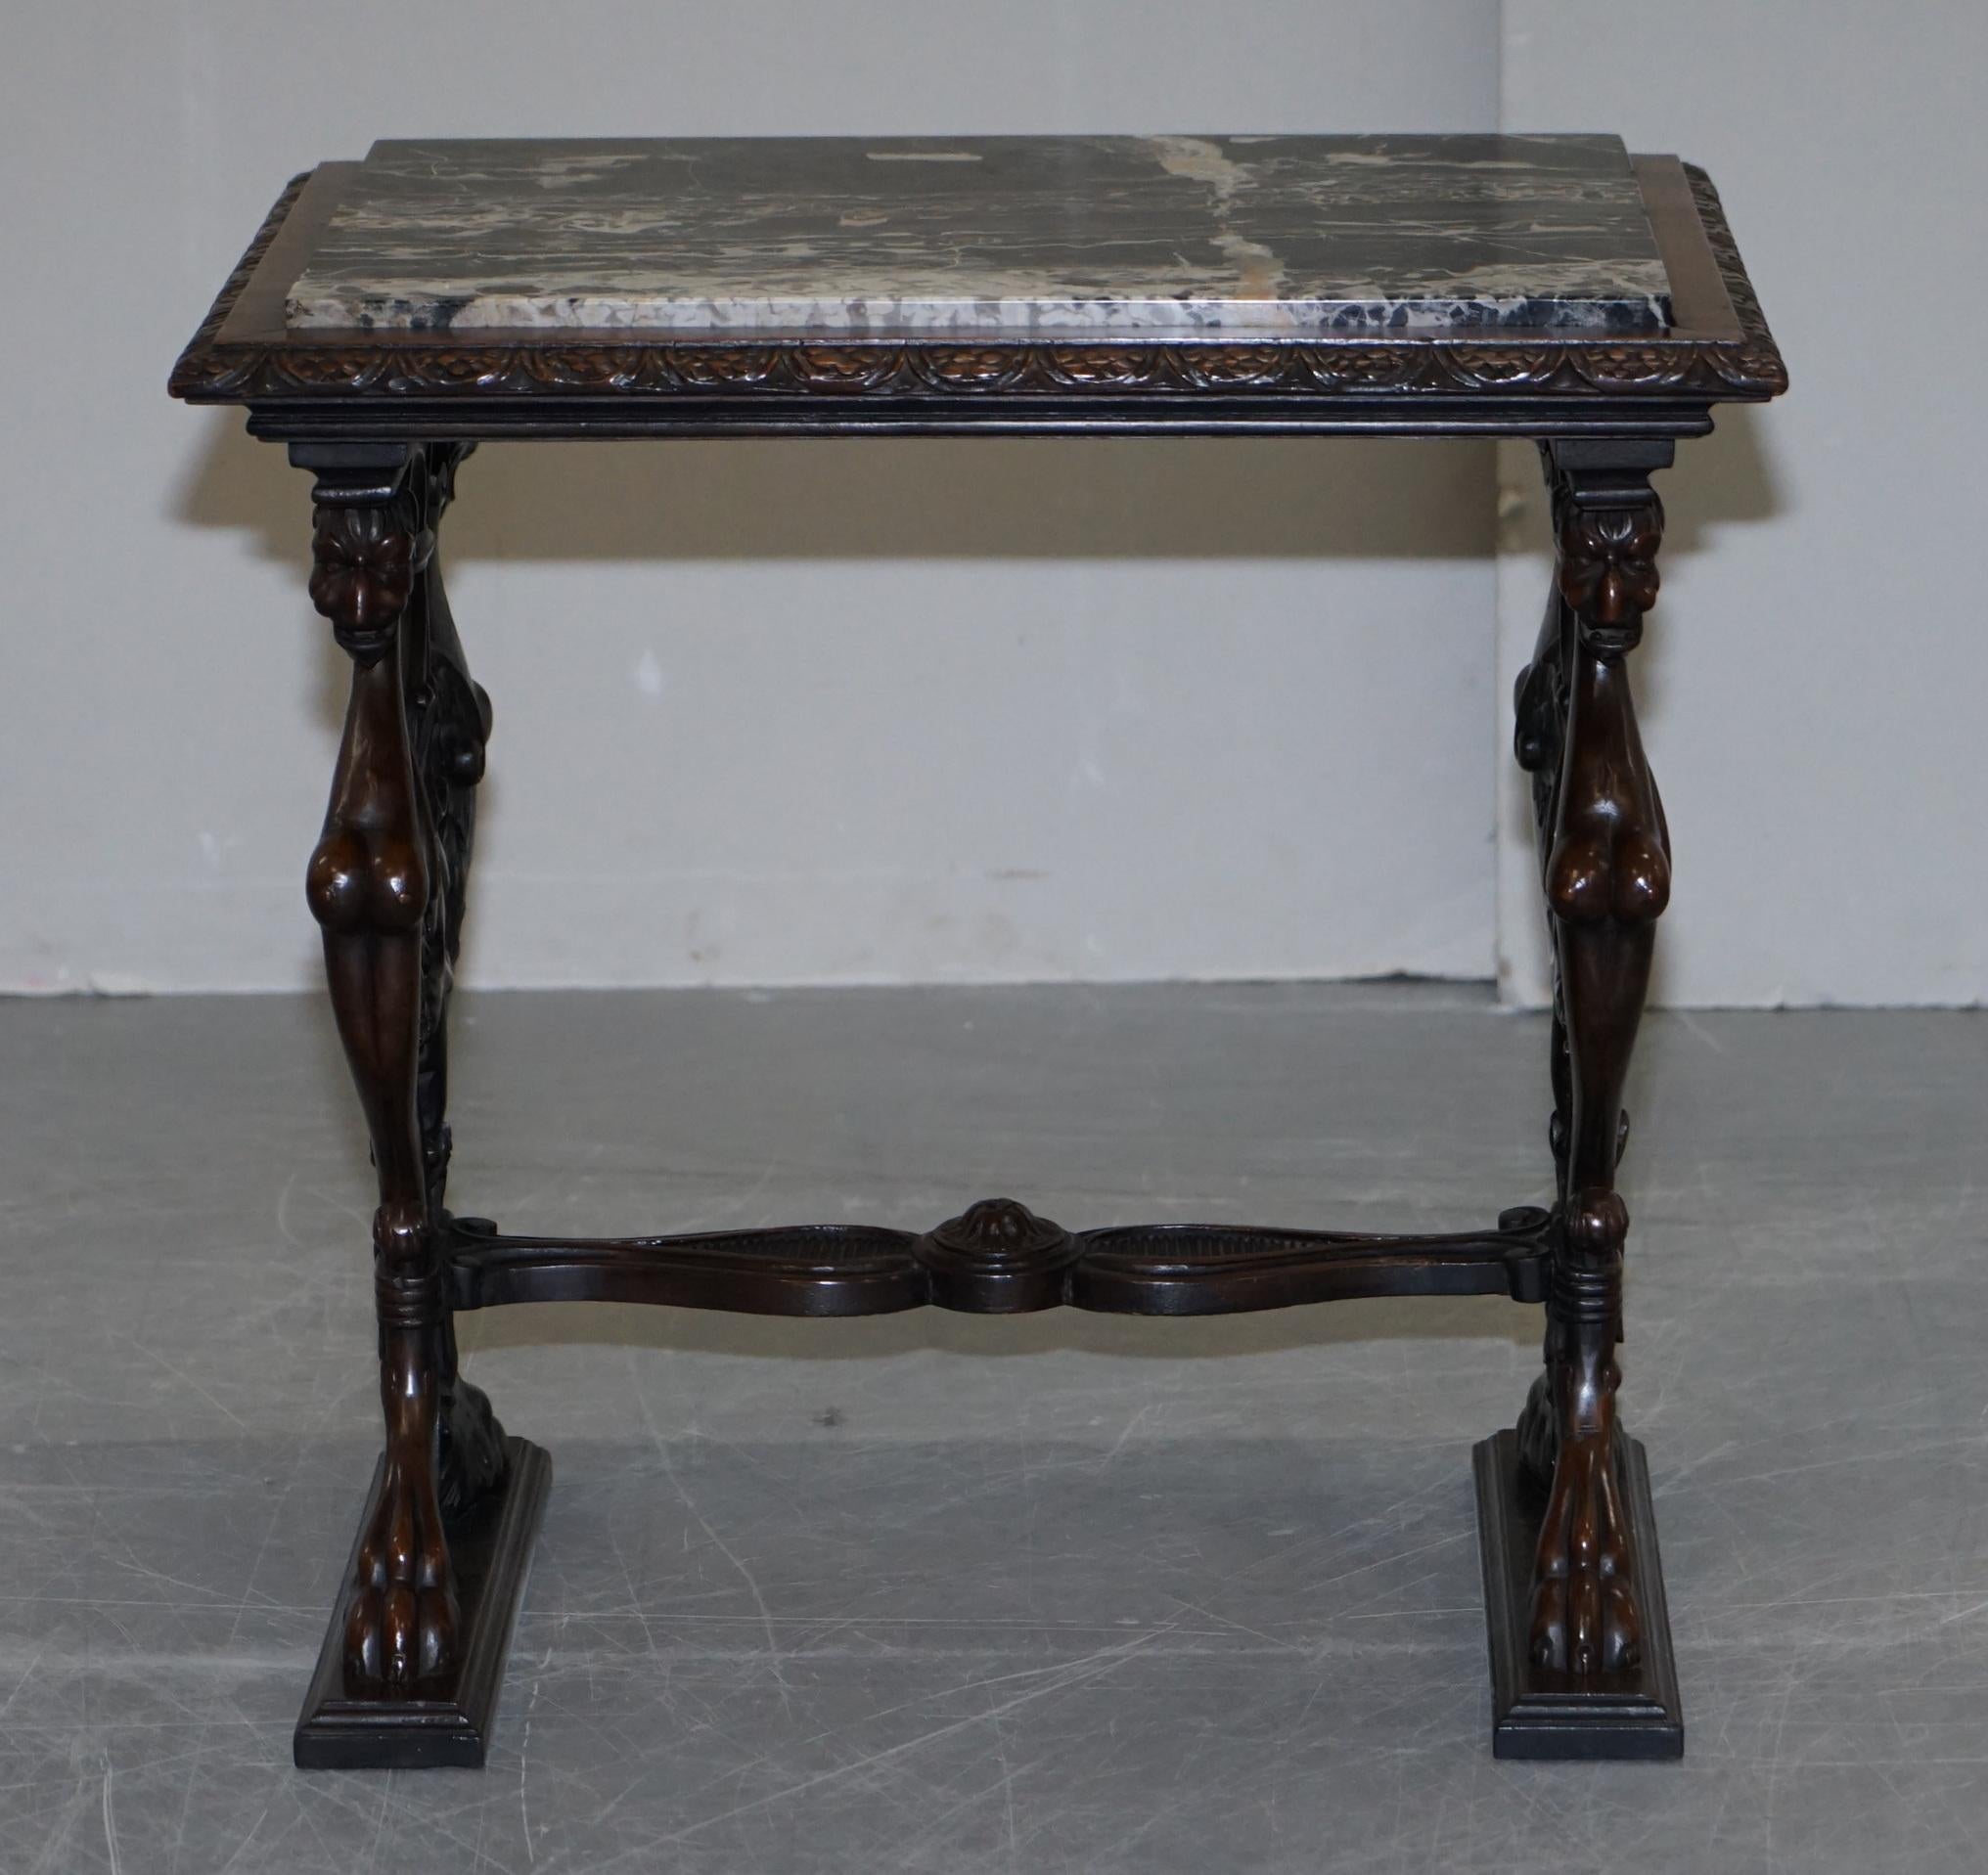 Italian circa 1840 Ornately Hand Carved Oak Side Table with Solid Marble Top For Sale 13